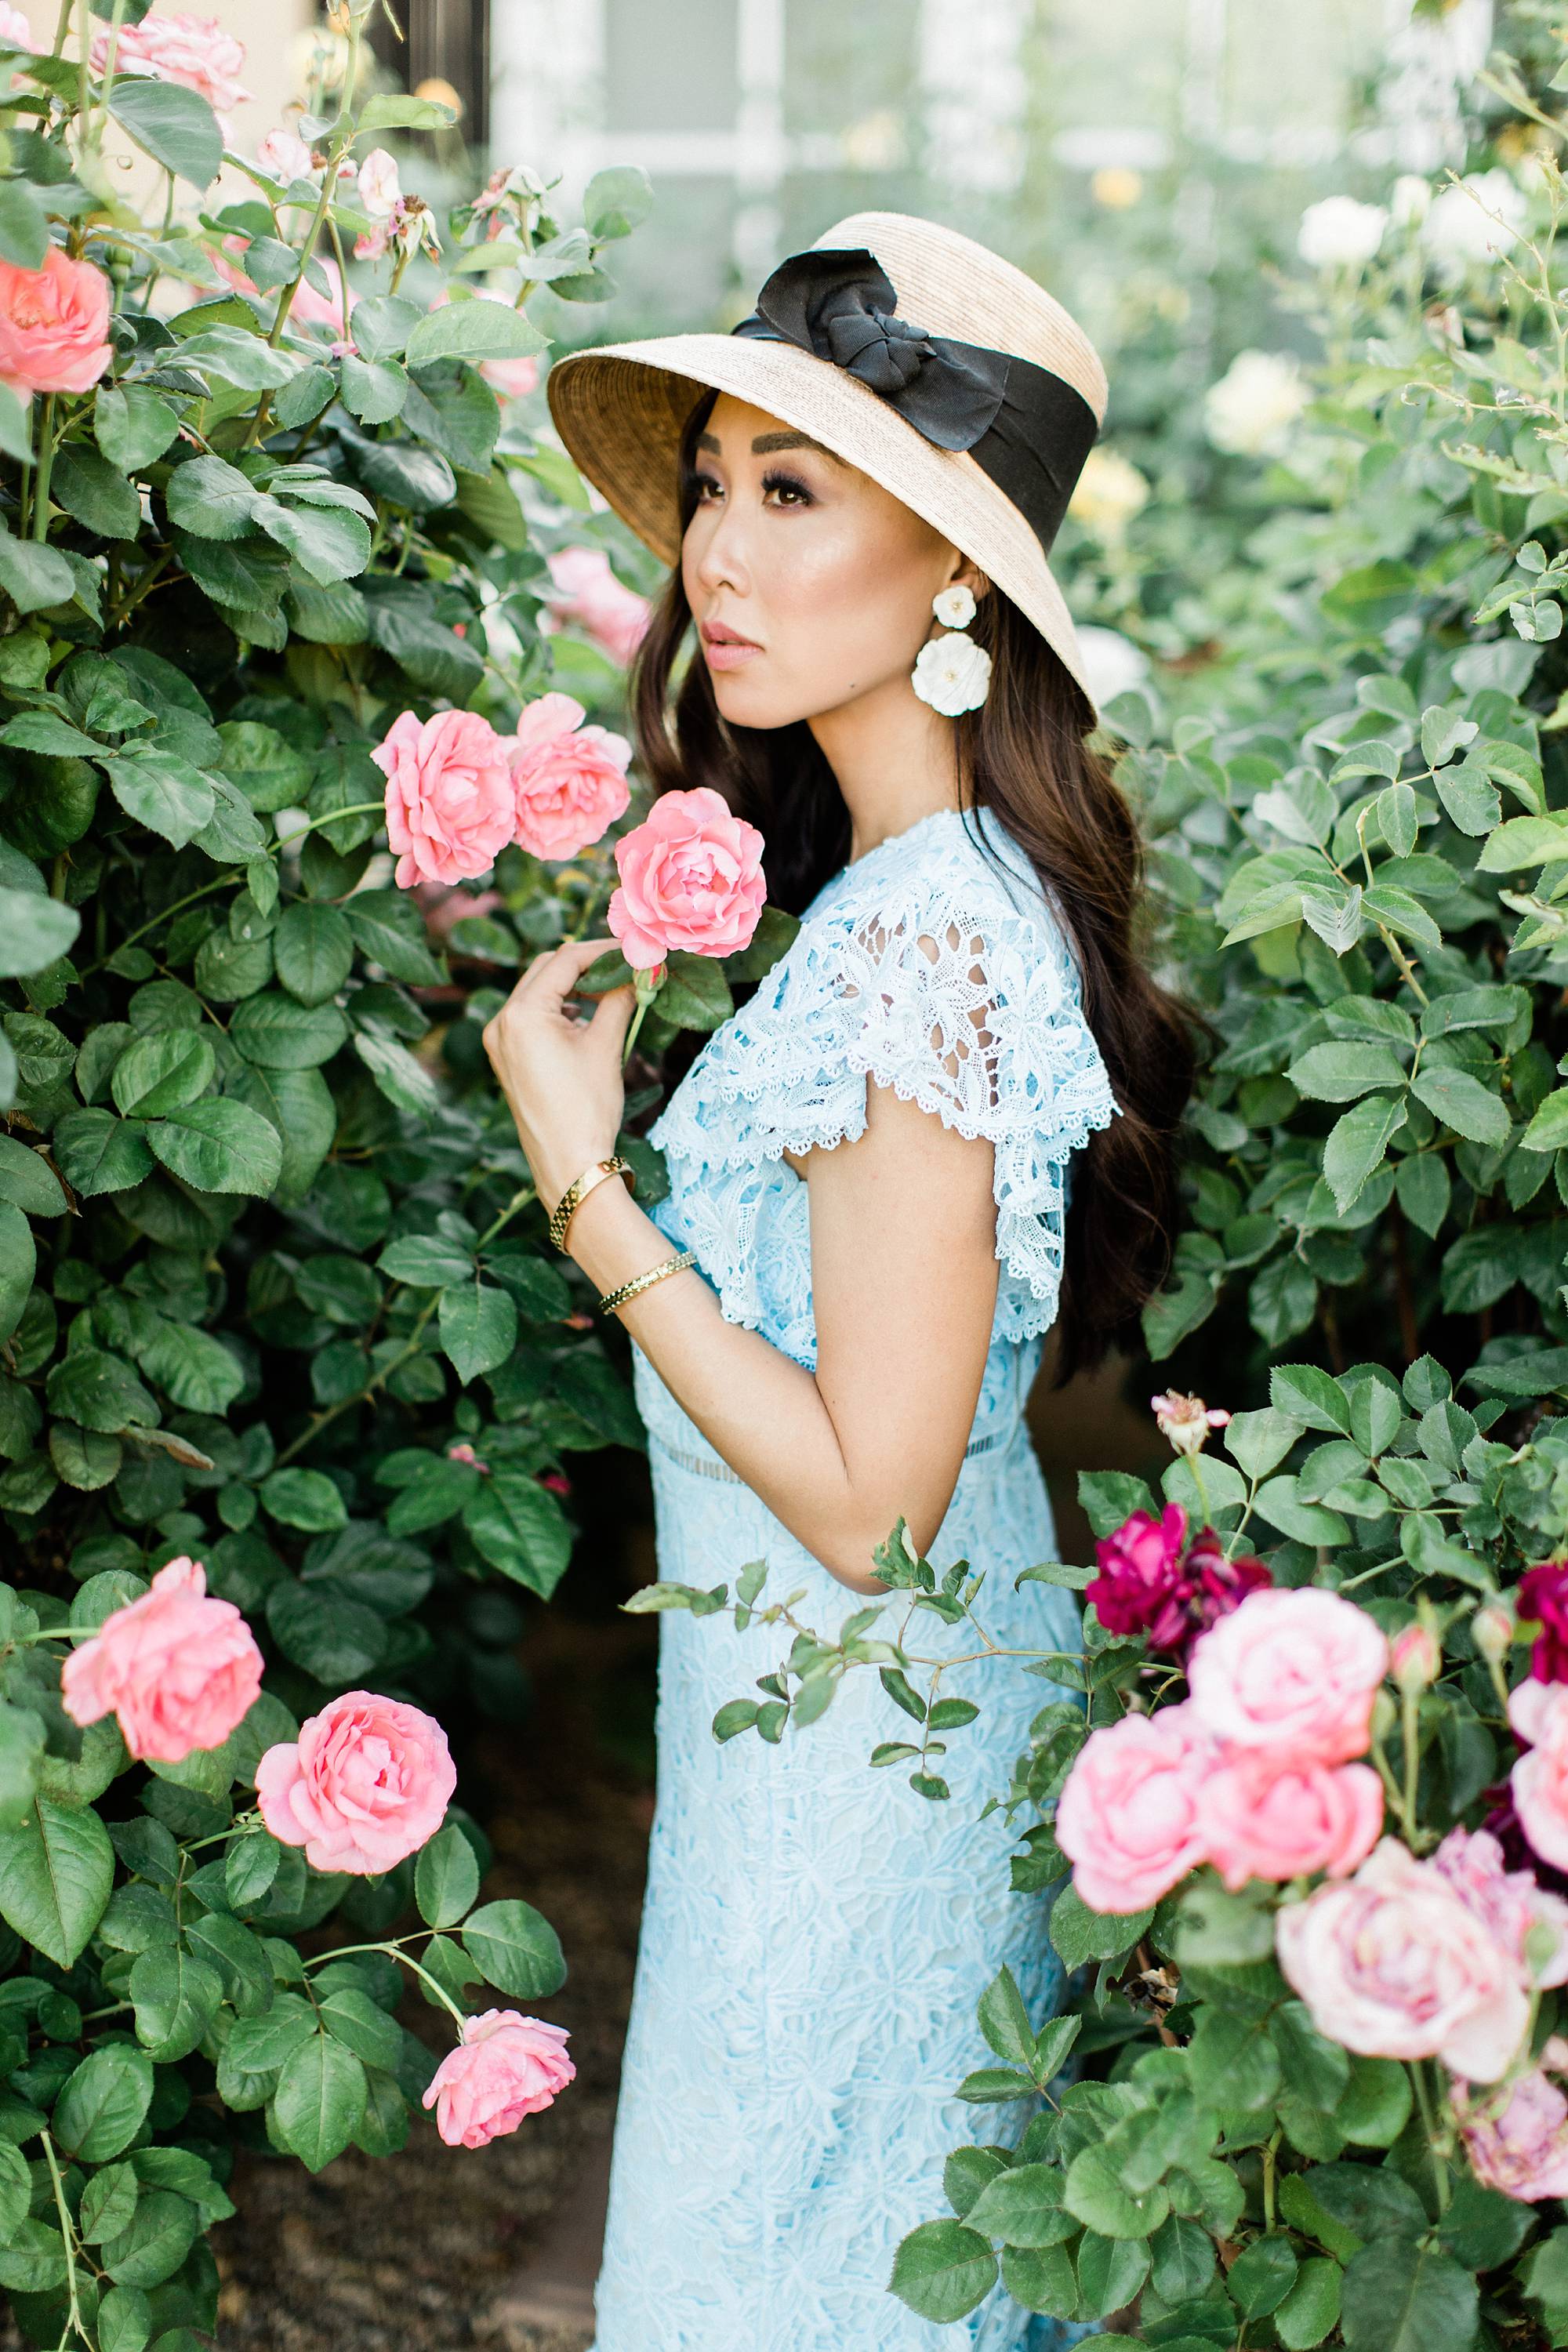 blue lace dress with garden hat from terrain nestled between pink roses